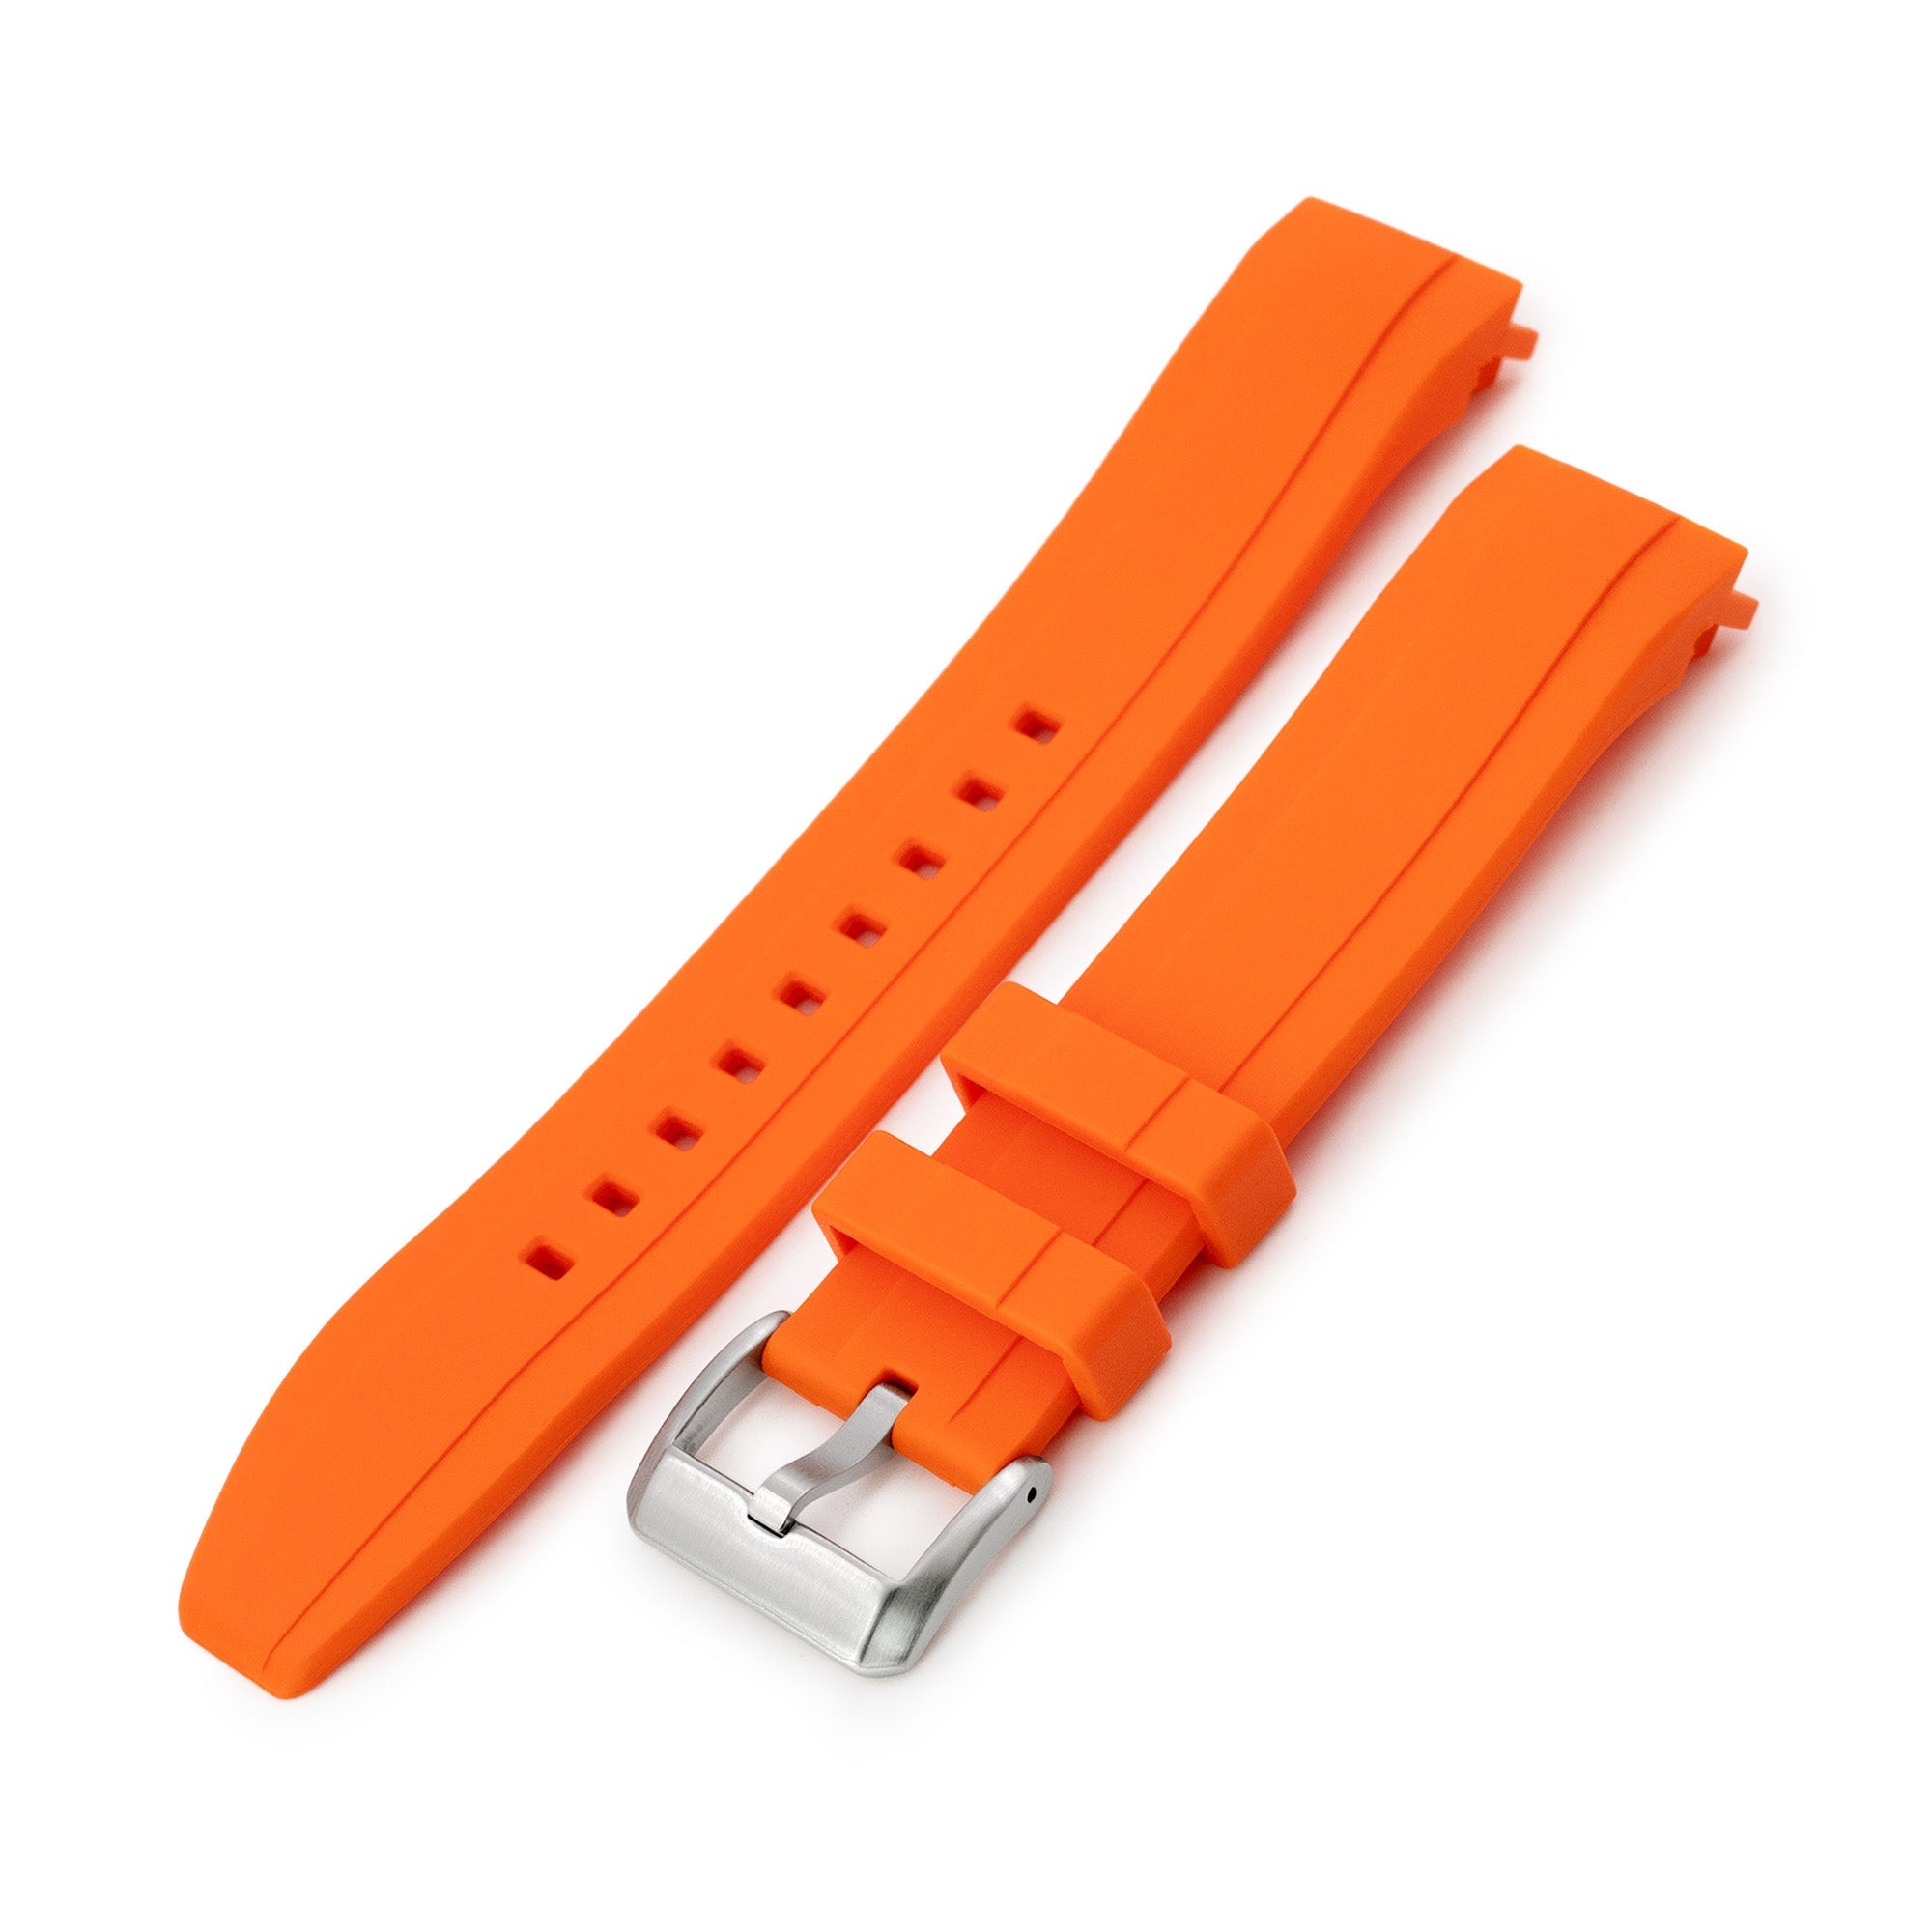 StrapXPro Lite - MX1A Rubber Strap for New Seiko Monster 4th Gen., Orange Strapcode Watch Bands